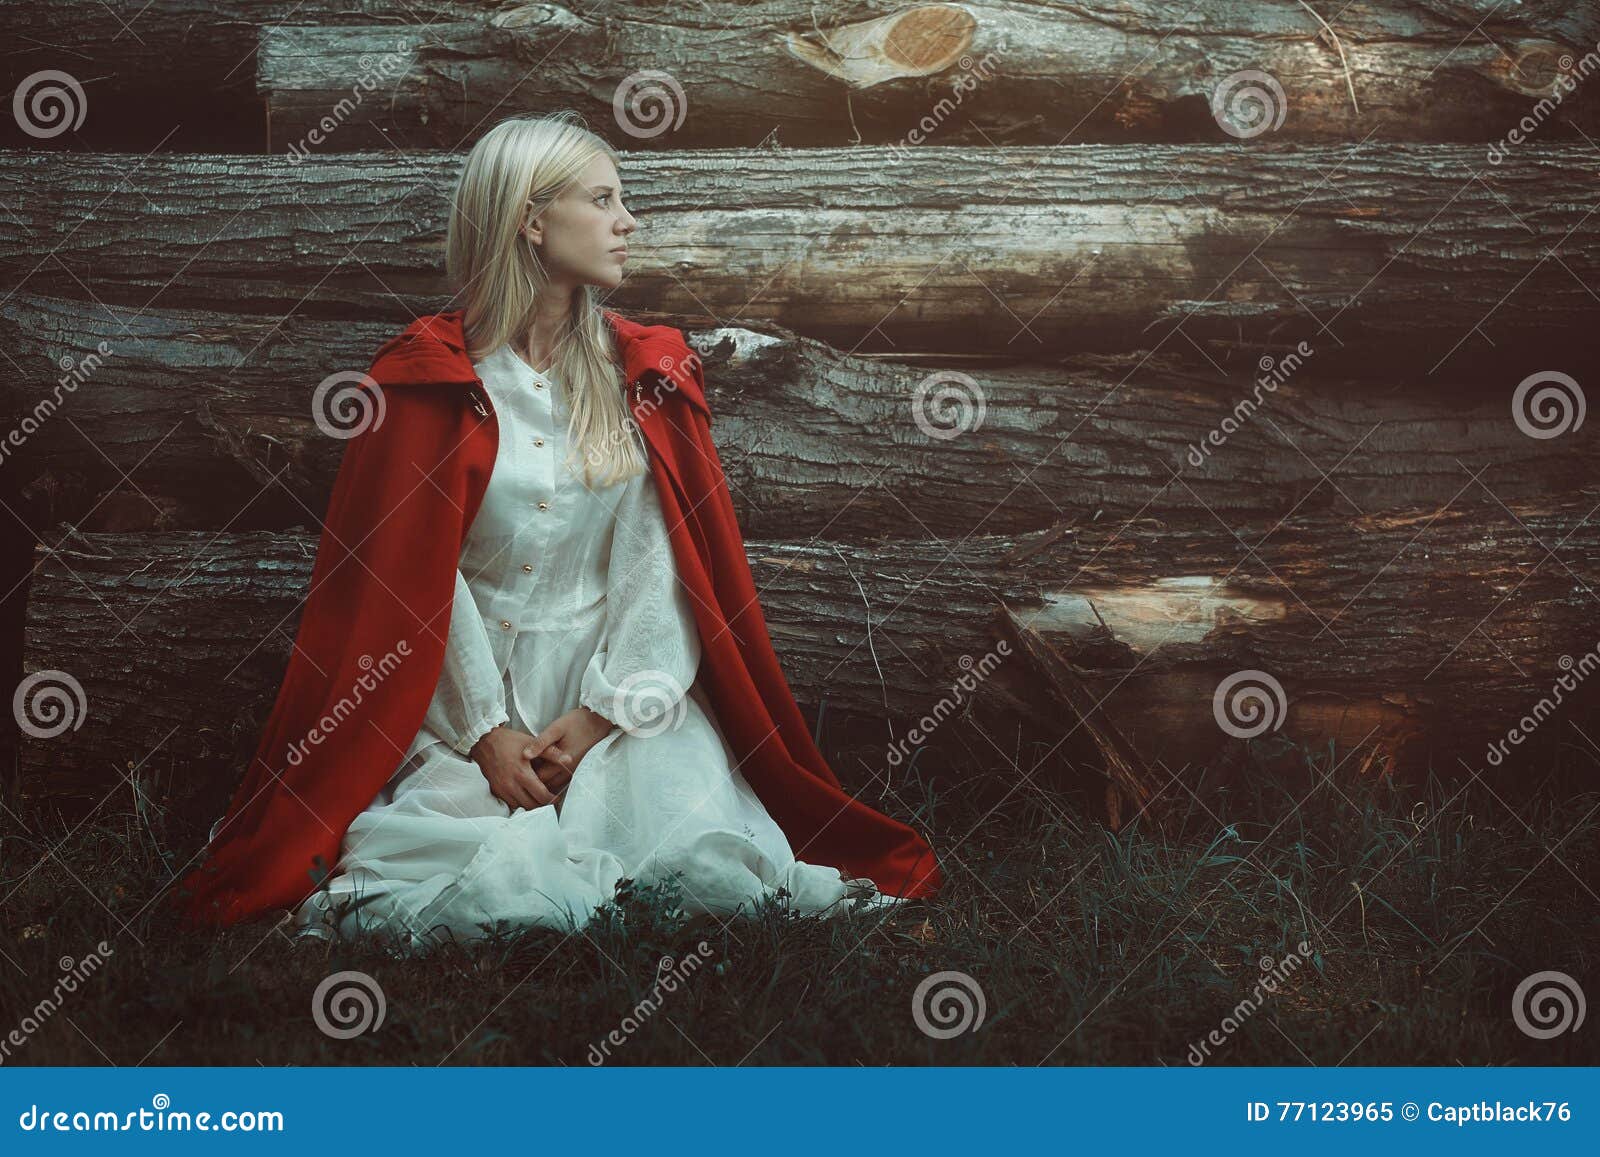 blond woman with red hooded cloak